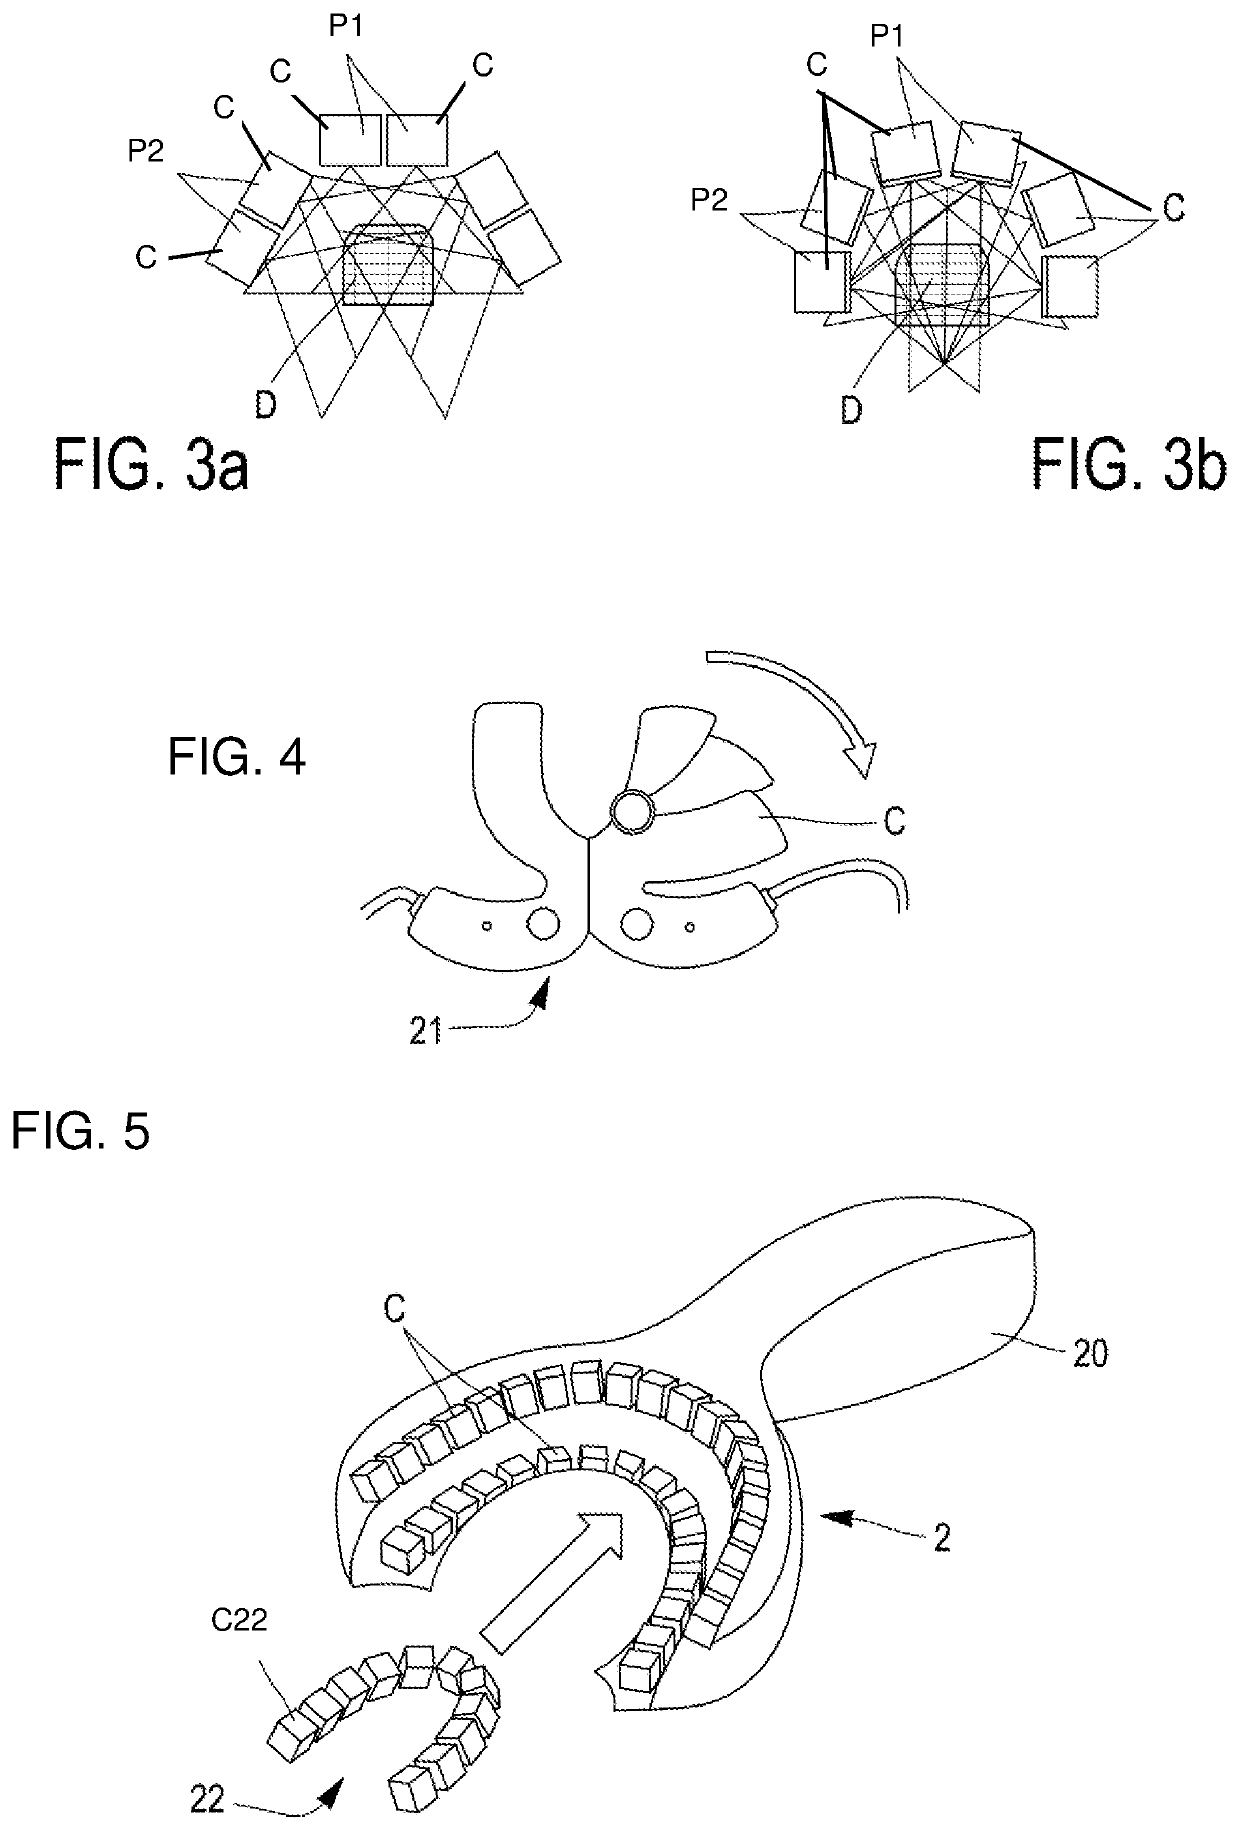 Electronic impression tray for obtaining dental information